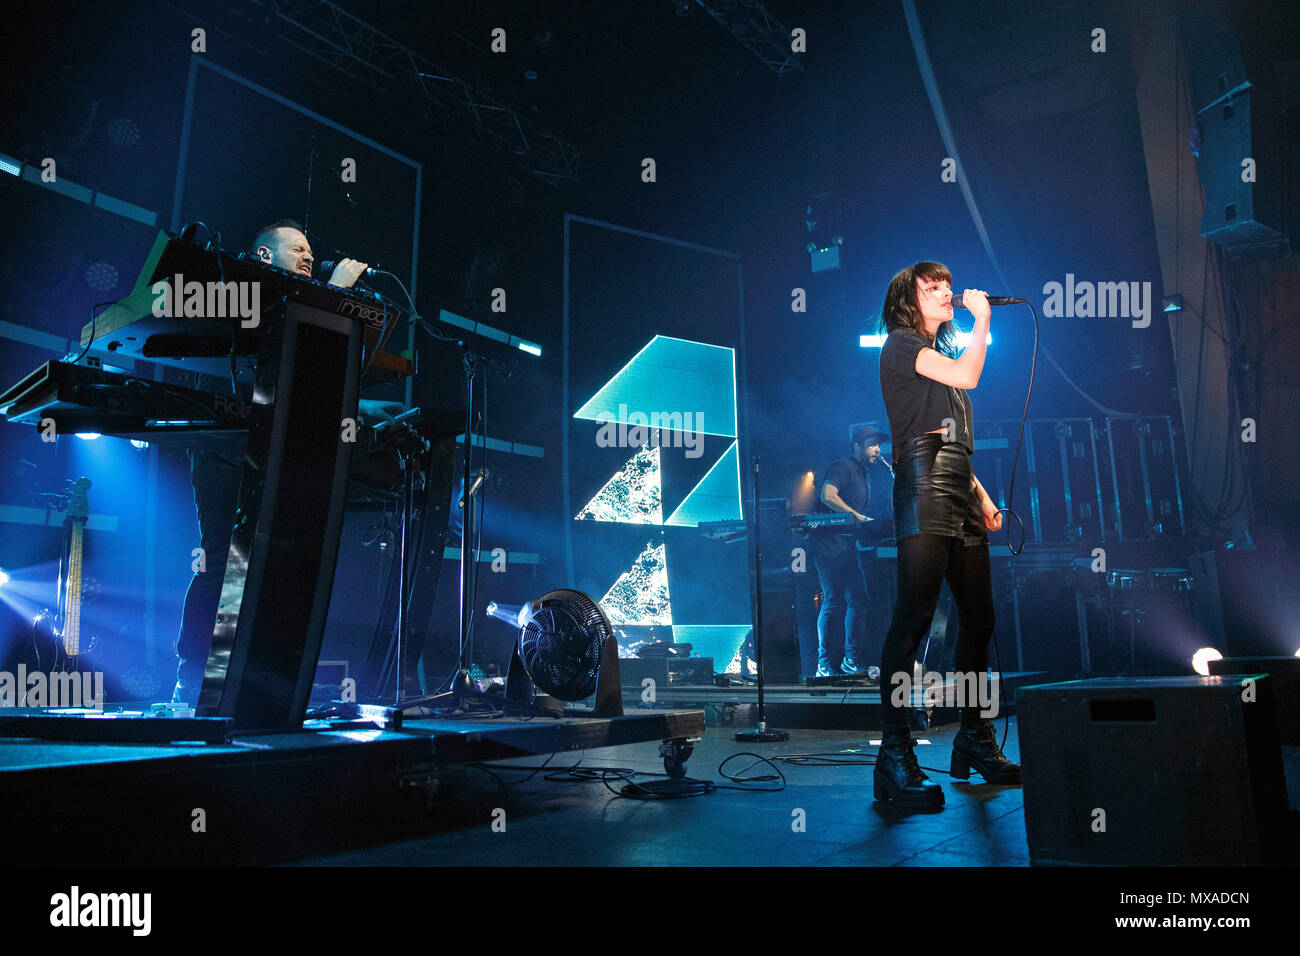 CHVRCHES performing live onstage during the Every Open Eye tour. Pictured are lead singer Lauren Mayberry (front), Iain Cook (back, close) and Martin Doherty (back, far). CHVRCHES band, CHVRCHES live, CHVRCHES in concert, Churches band. Stock Photo